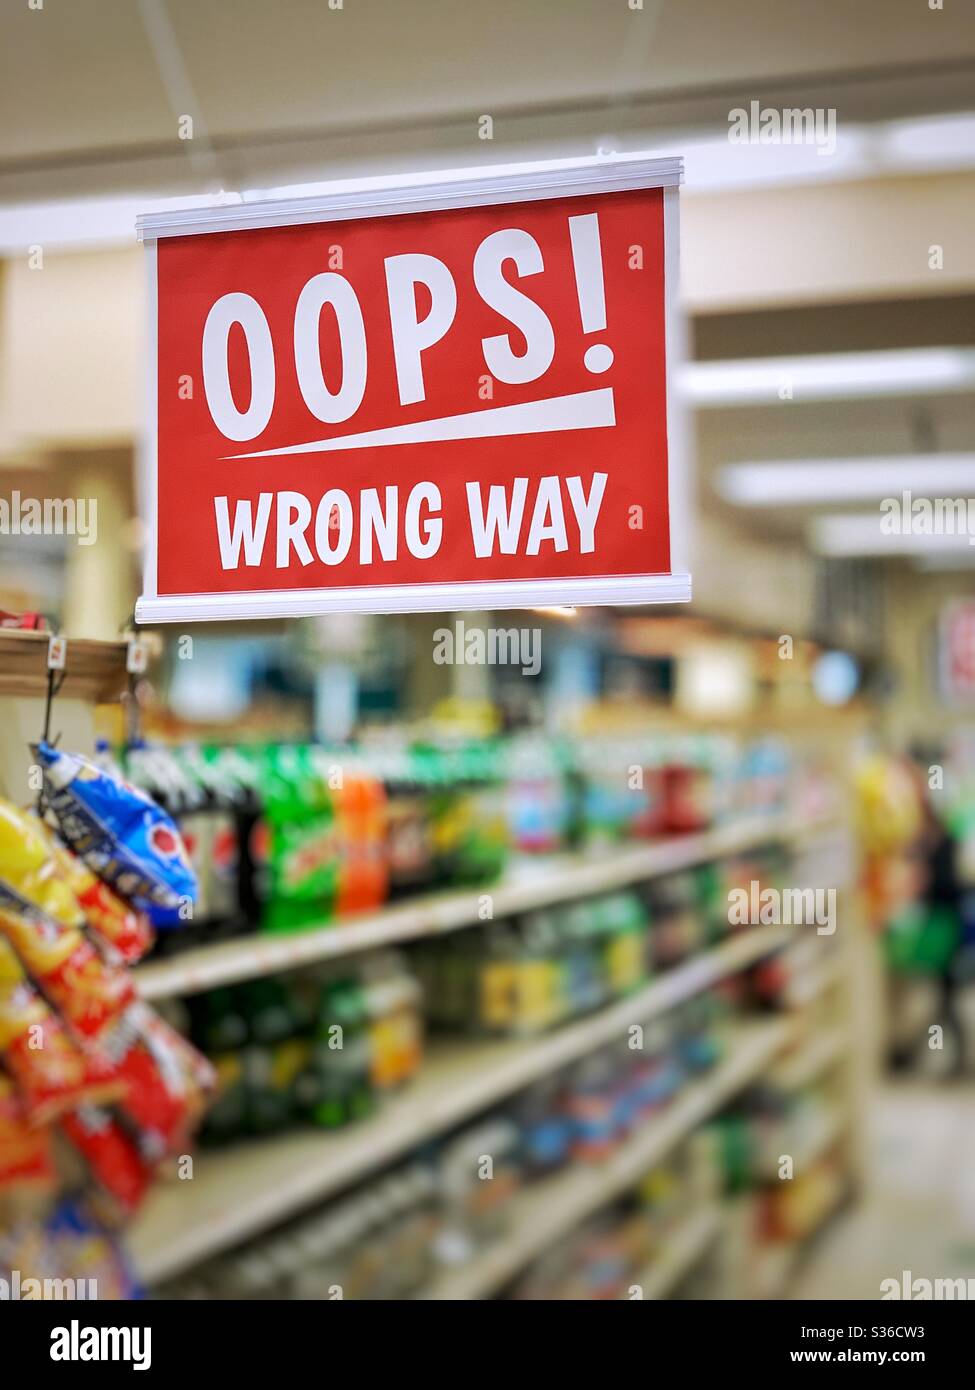 Oops wrong way sign in super market  for social distancing Stock Photo